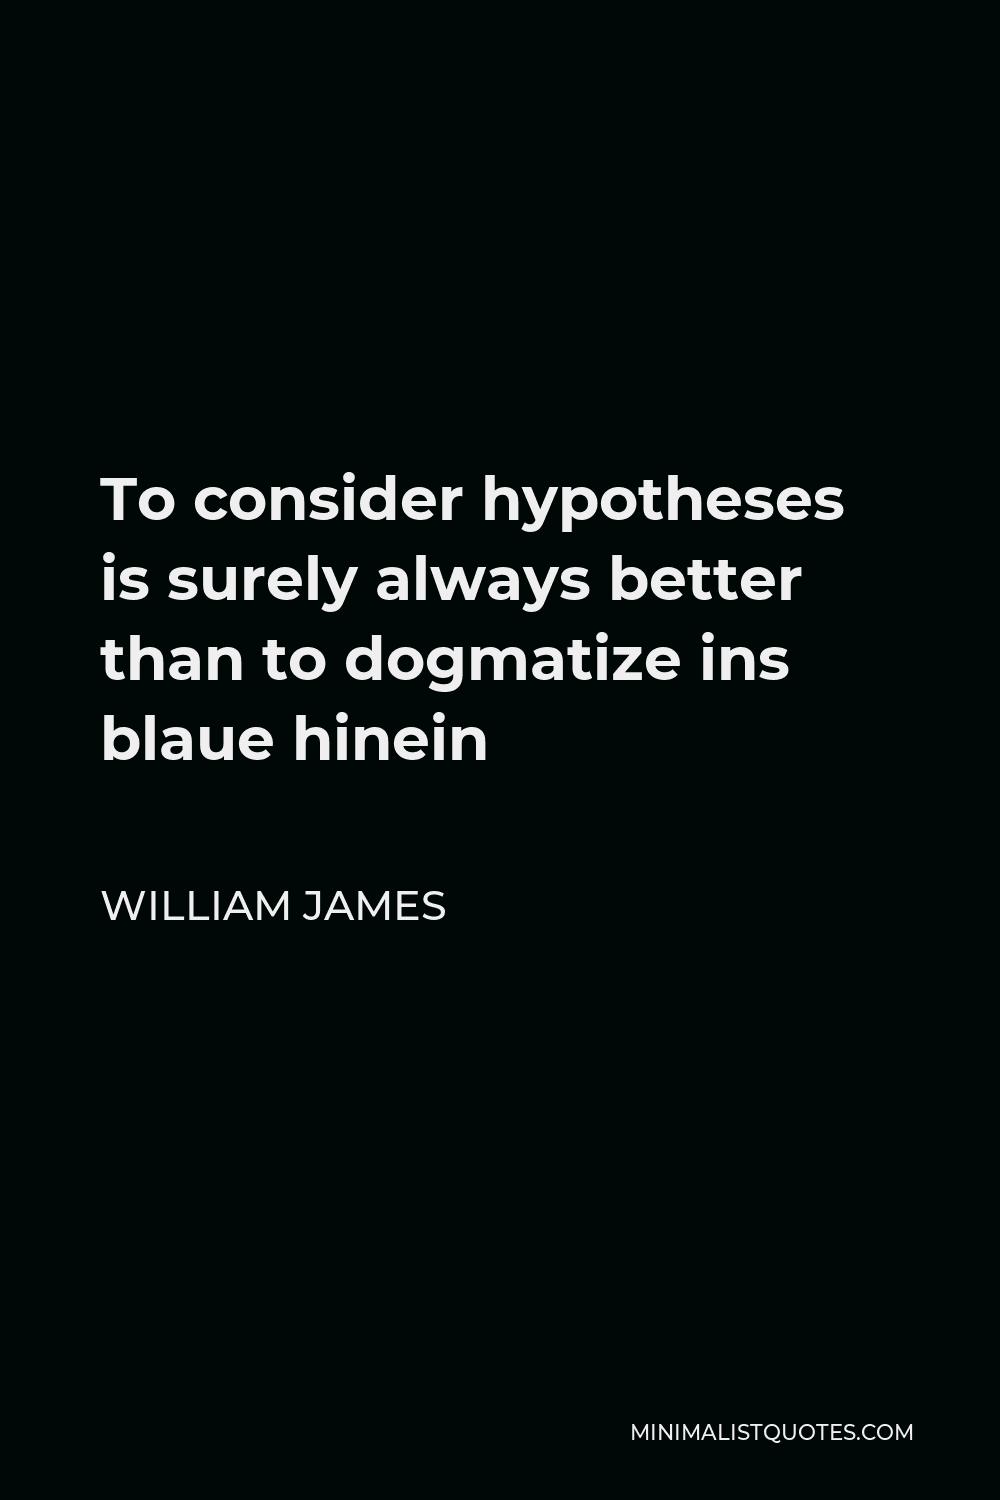 William James Quote - To consider hypotheses is surely always better than to dogmatize ins blaue hinein